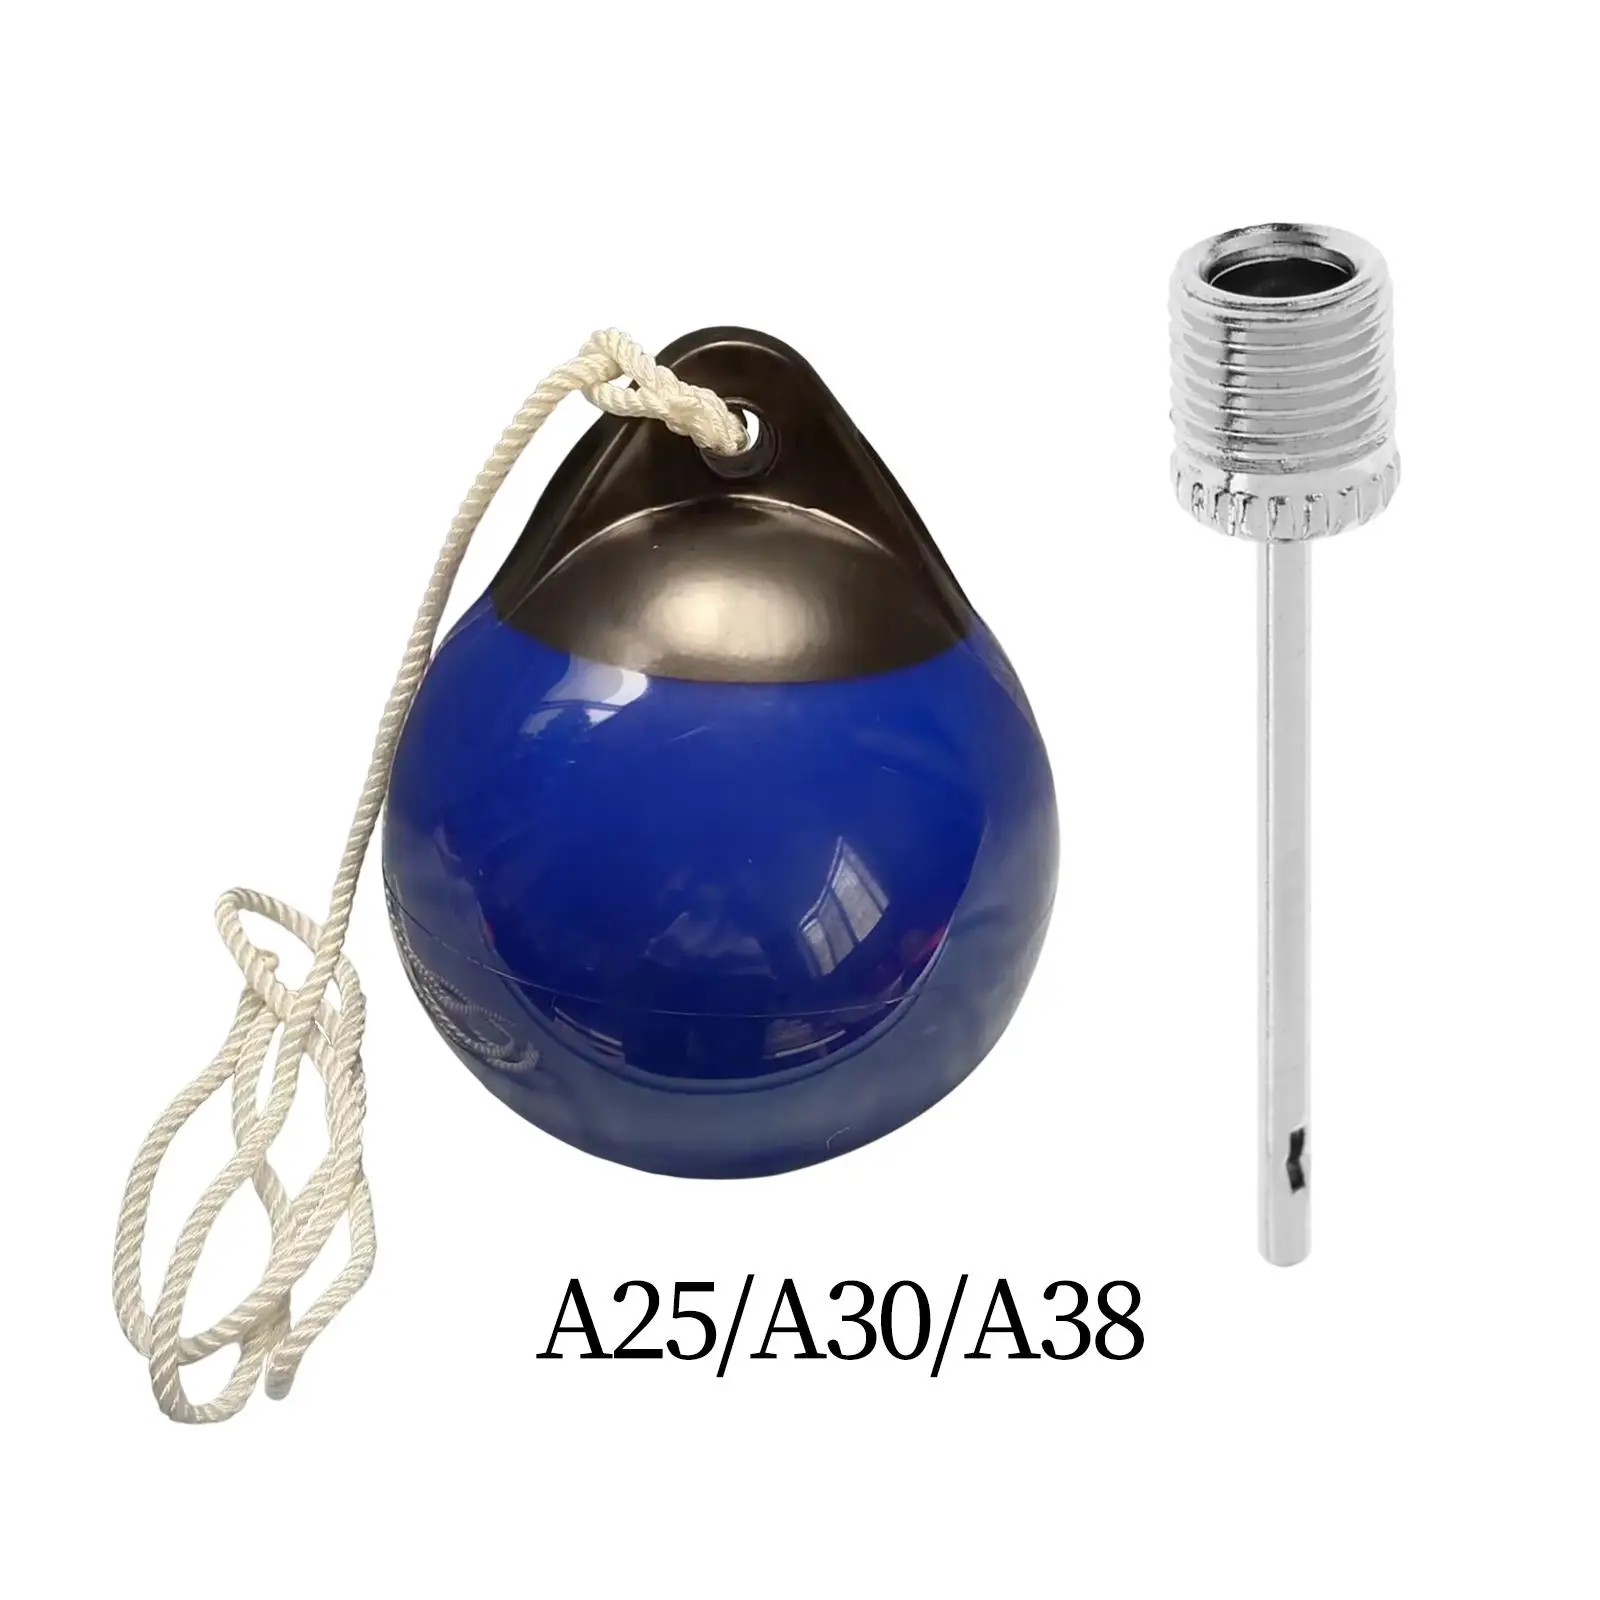 

Boat Dock ball PVC Inflatable Wear Resistance Protection, Round Anchor Buoy Marine Mooring Buoy for Fishing Boats